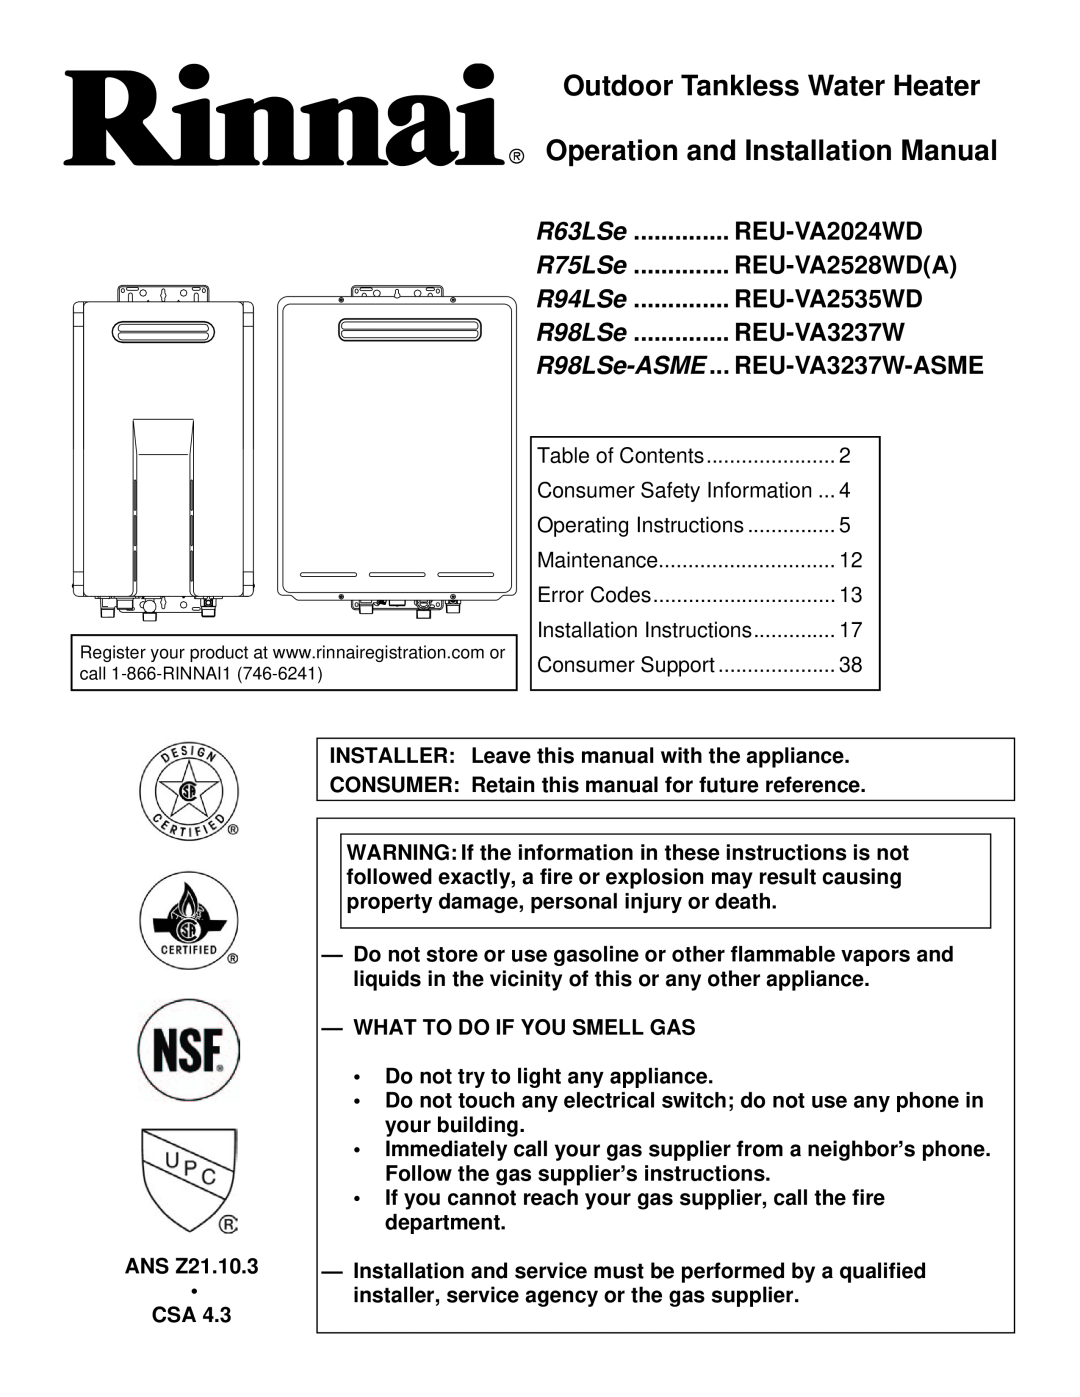 Rinnai R98LSE-ASME installation manual Outdoor Tankless Water Heater, Operation and Installation Manual, R63LSe, R75LSe 